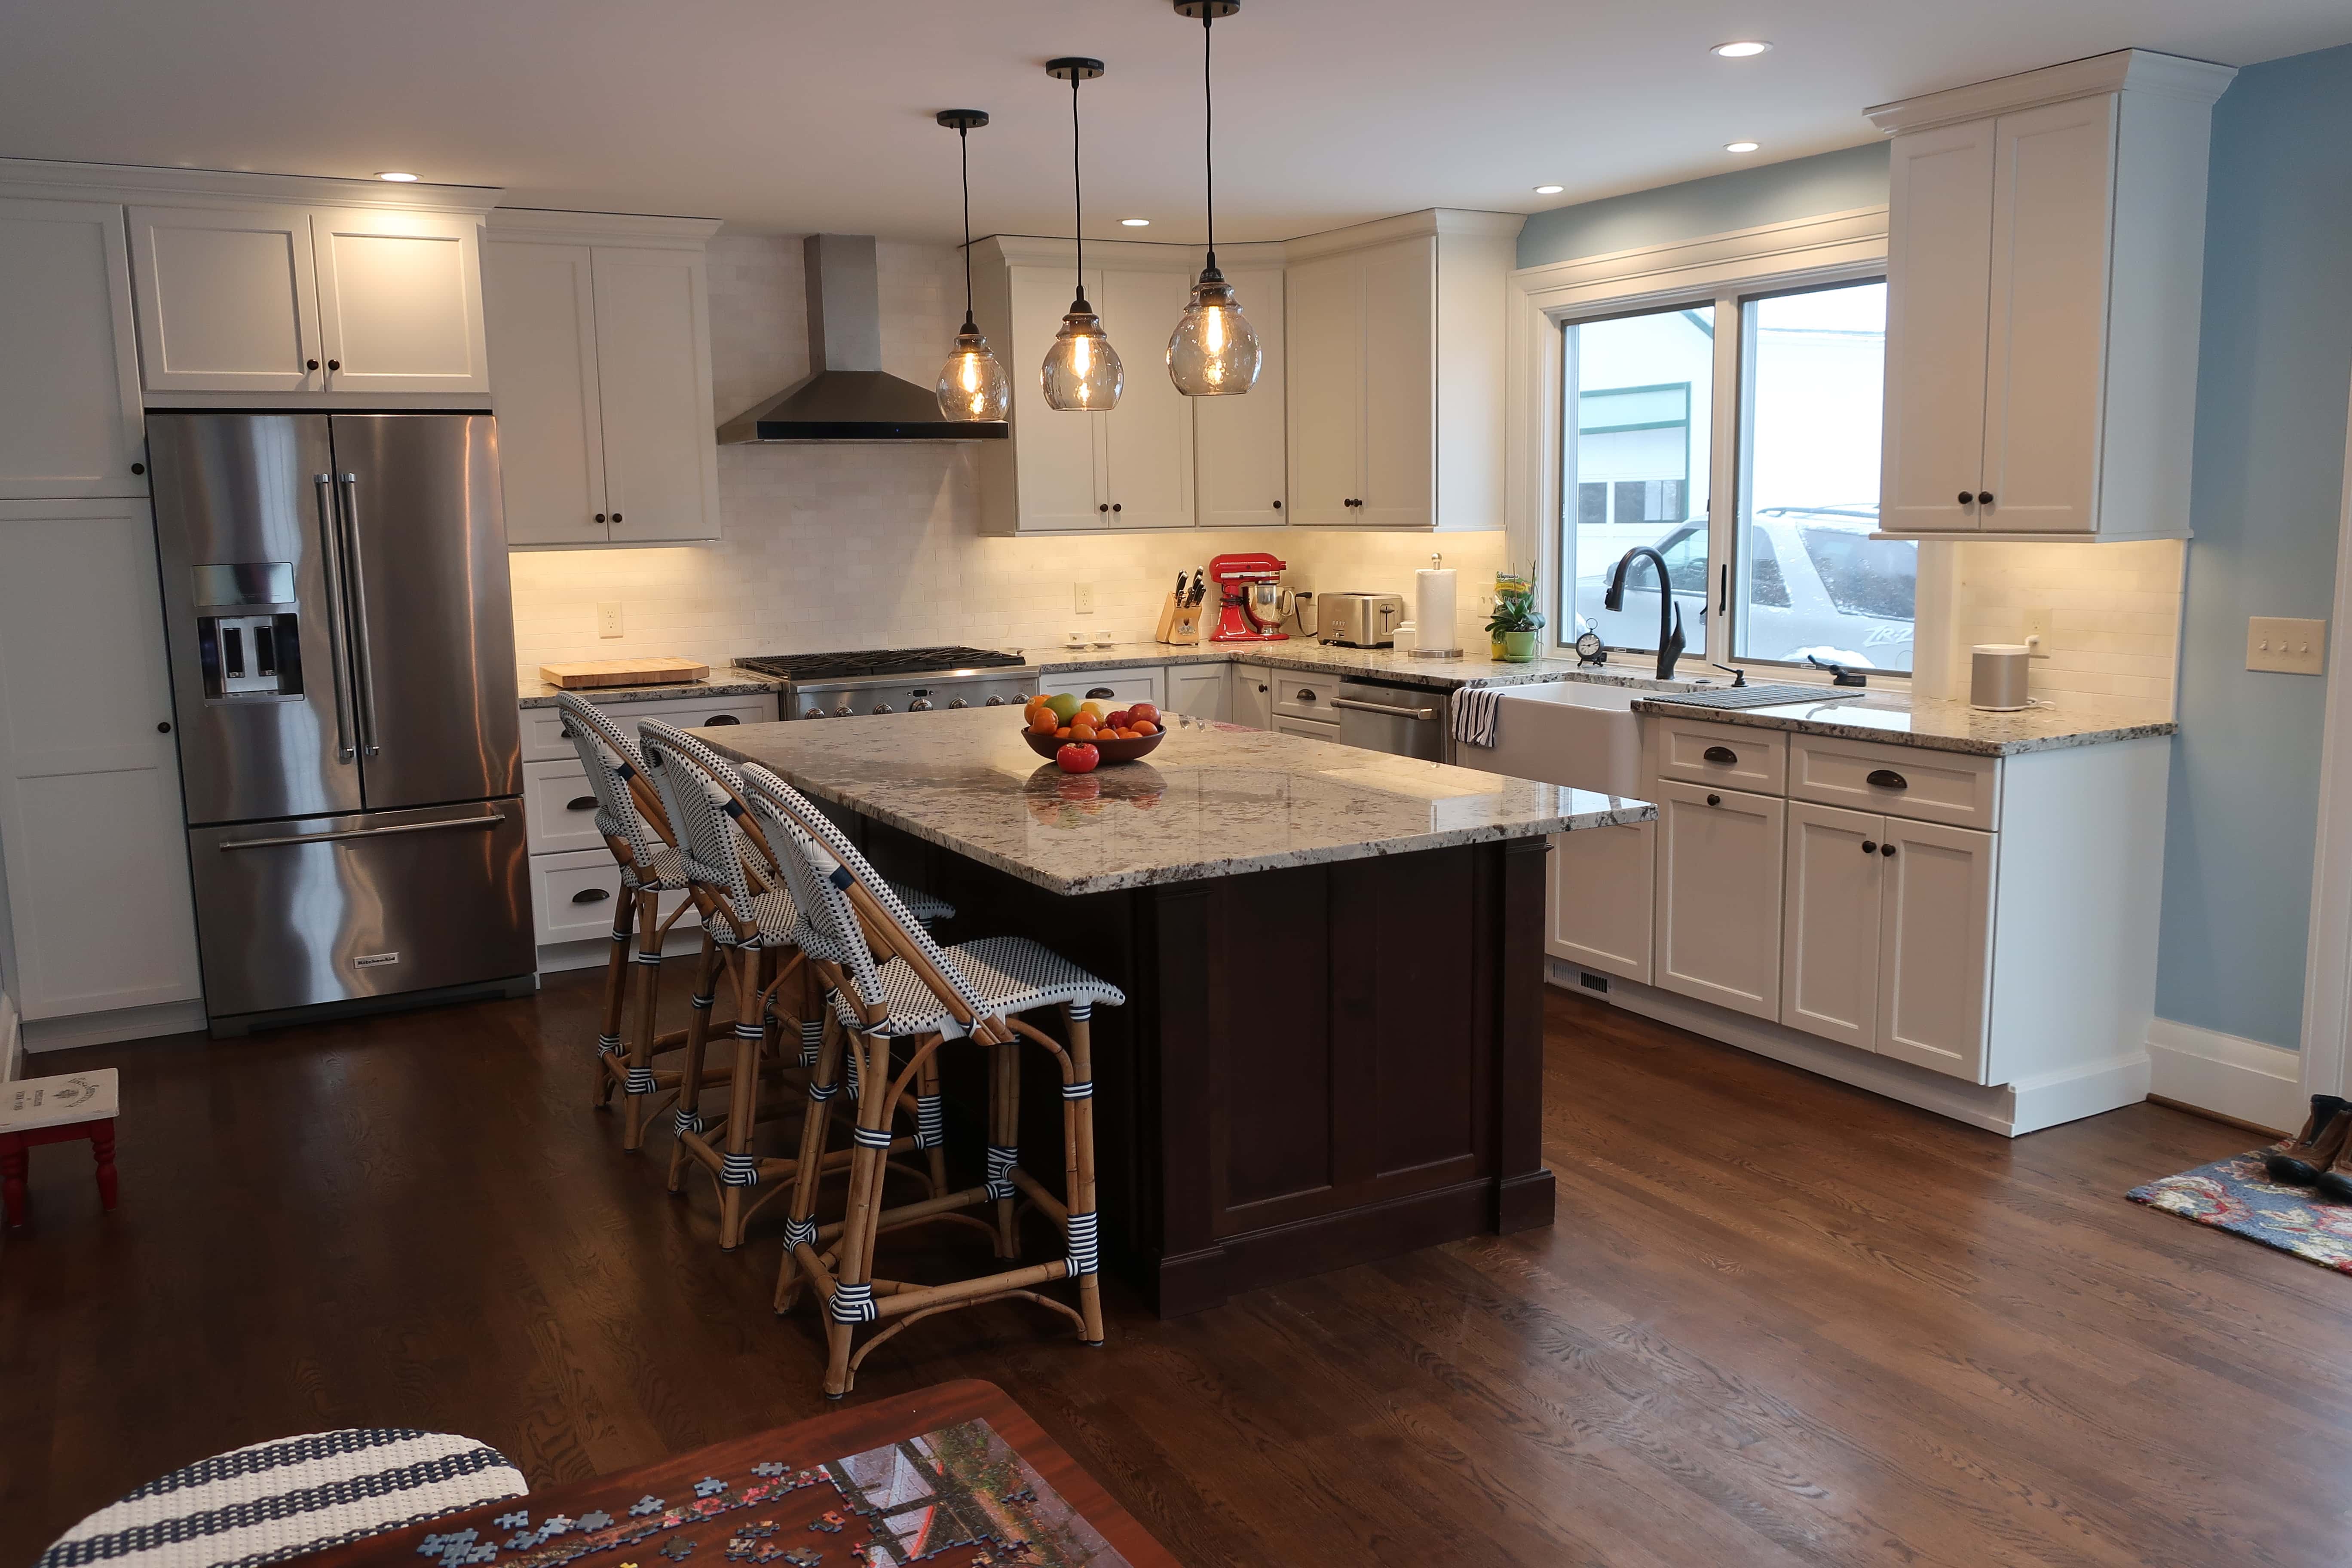 Roberts Kitchens - Kitchen & Bathroom Remodeling - Pittsford, NY, US, cabinet contractors near me